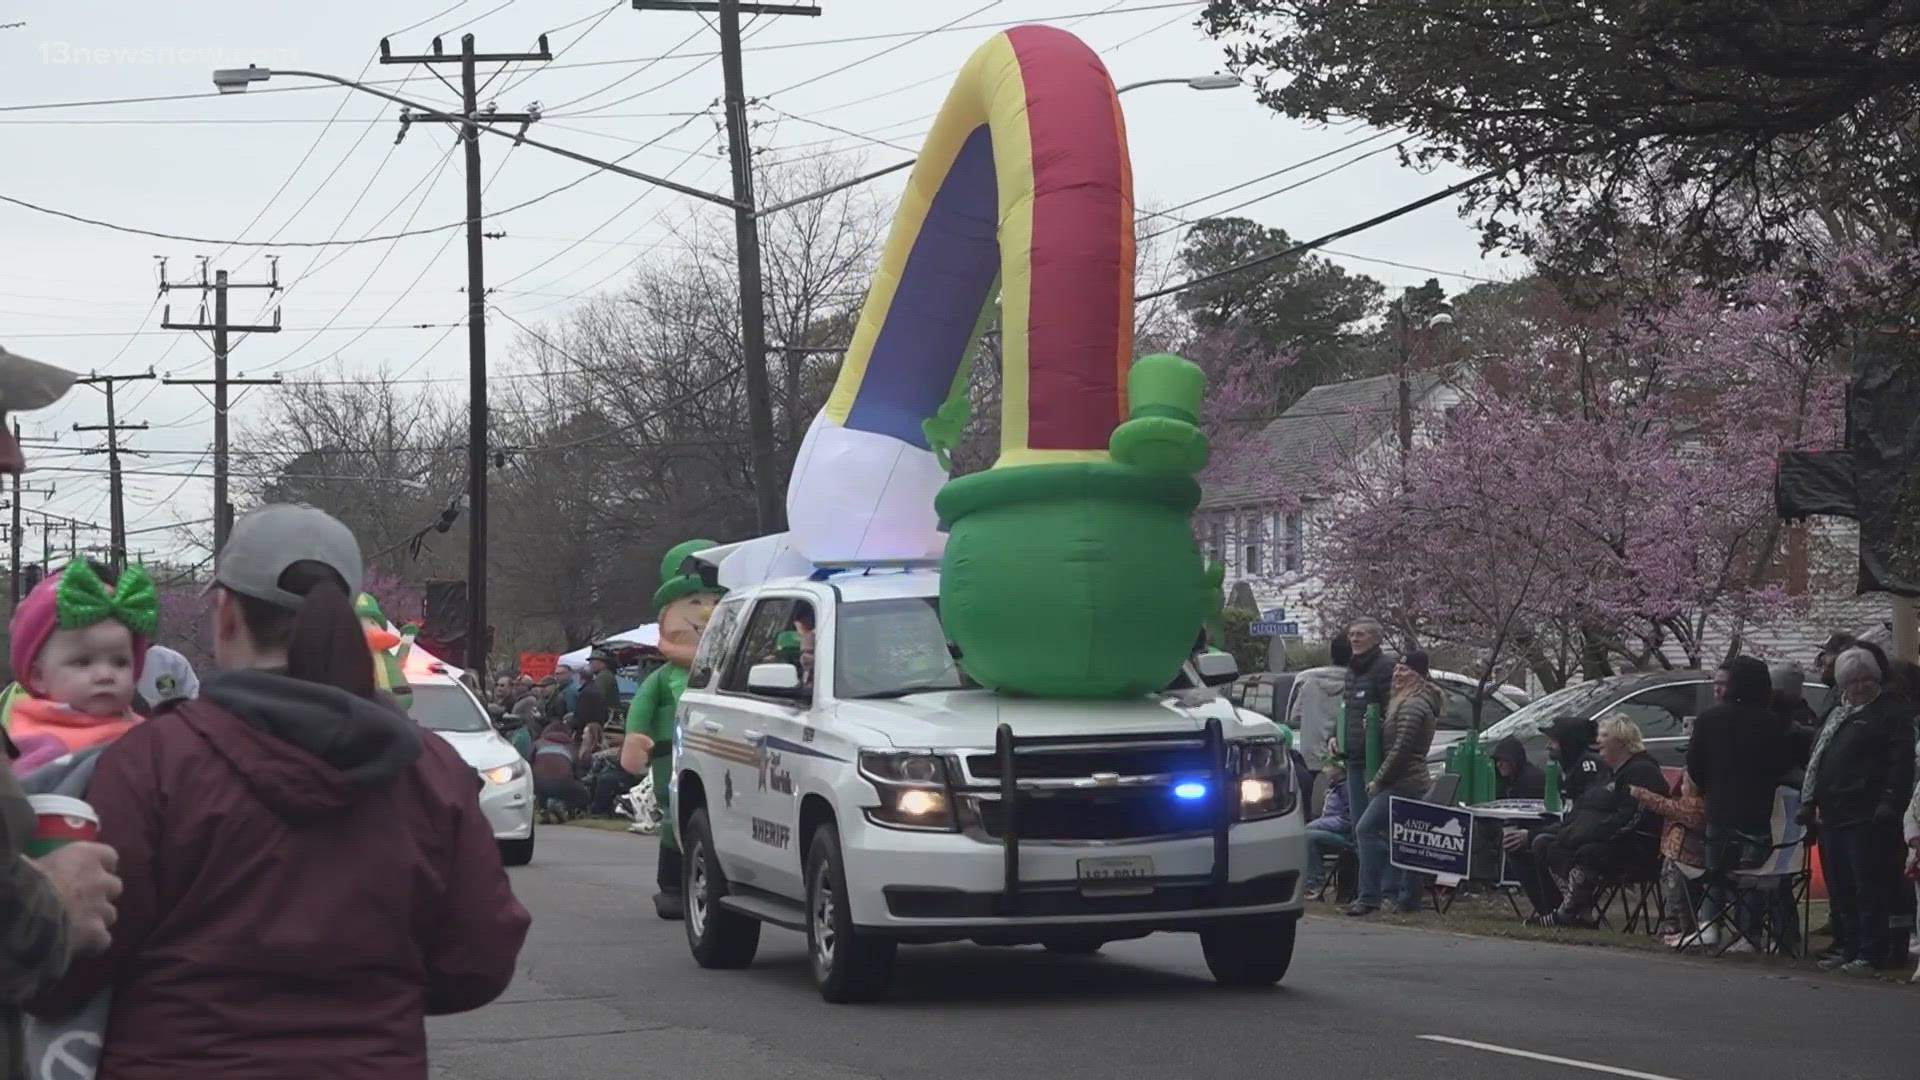 For several people, the St. Patrick’s Day Parade is a beloved tradition and after a 3-year hiatus due to weather and the COVID-19 pandemic, it's finally back!